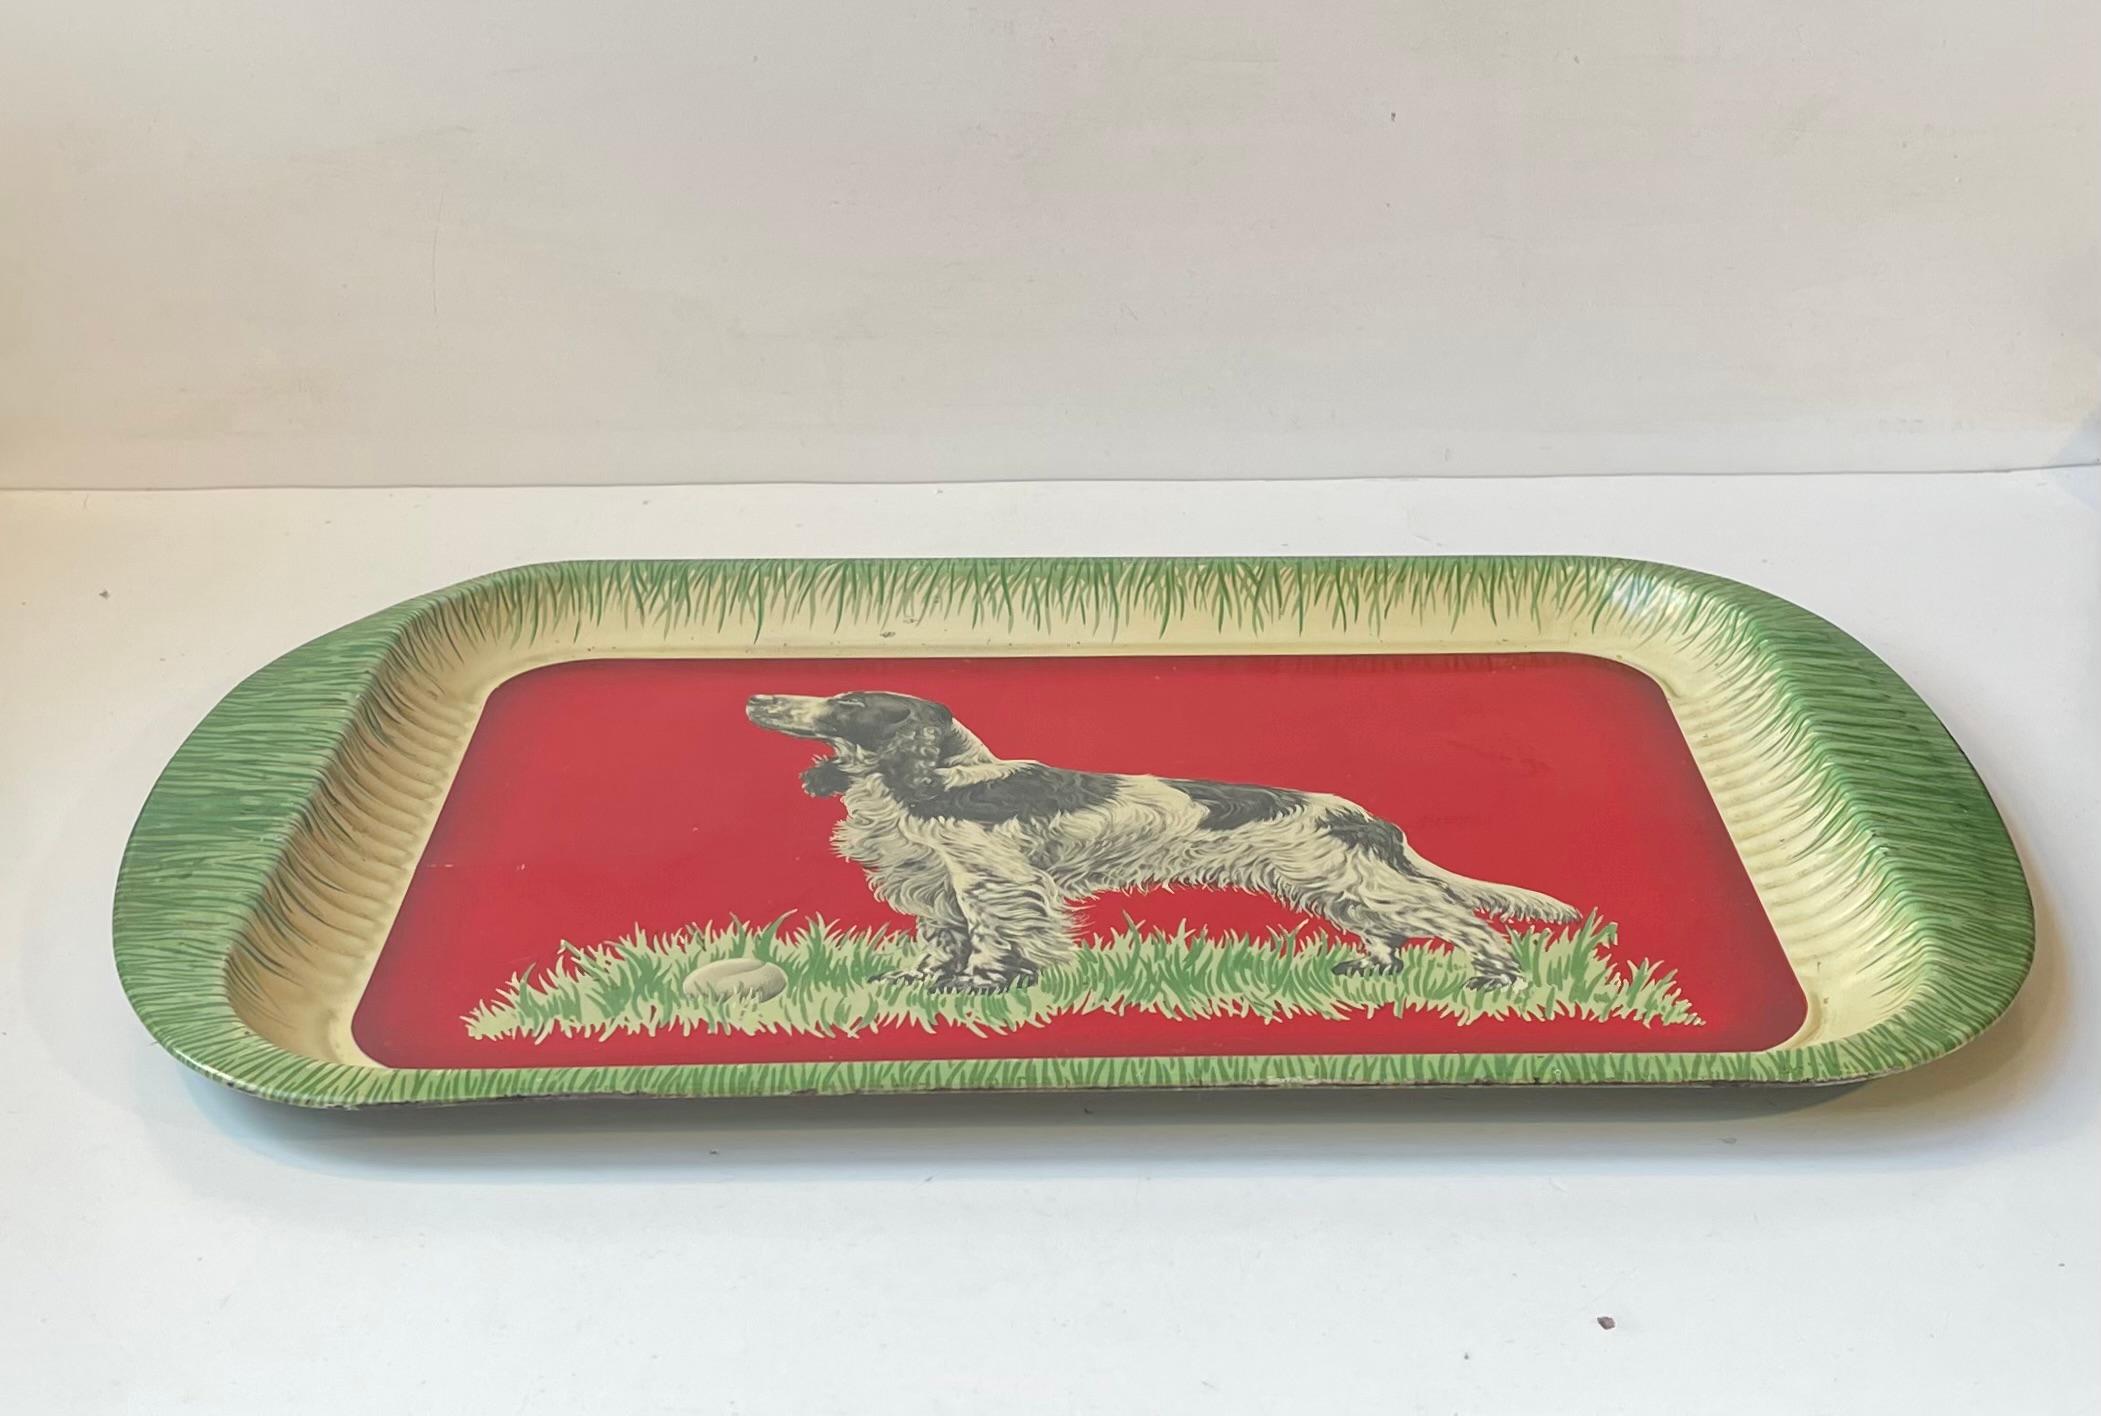 A 1950s tin-plate kitsch serving tray celebrating the beauty of a Springer Spaniel. This is design number 582 made by Handiware in England circa 1950-60. Makers mark present beneath the transfer-printed motif. Measurements: W/L: 47 cm, Dept: 31 cm,